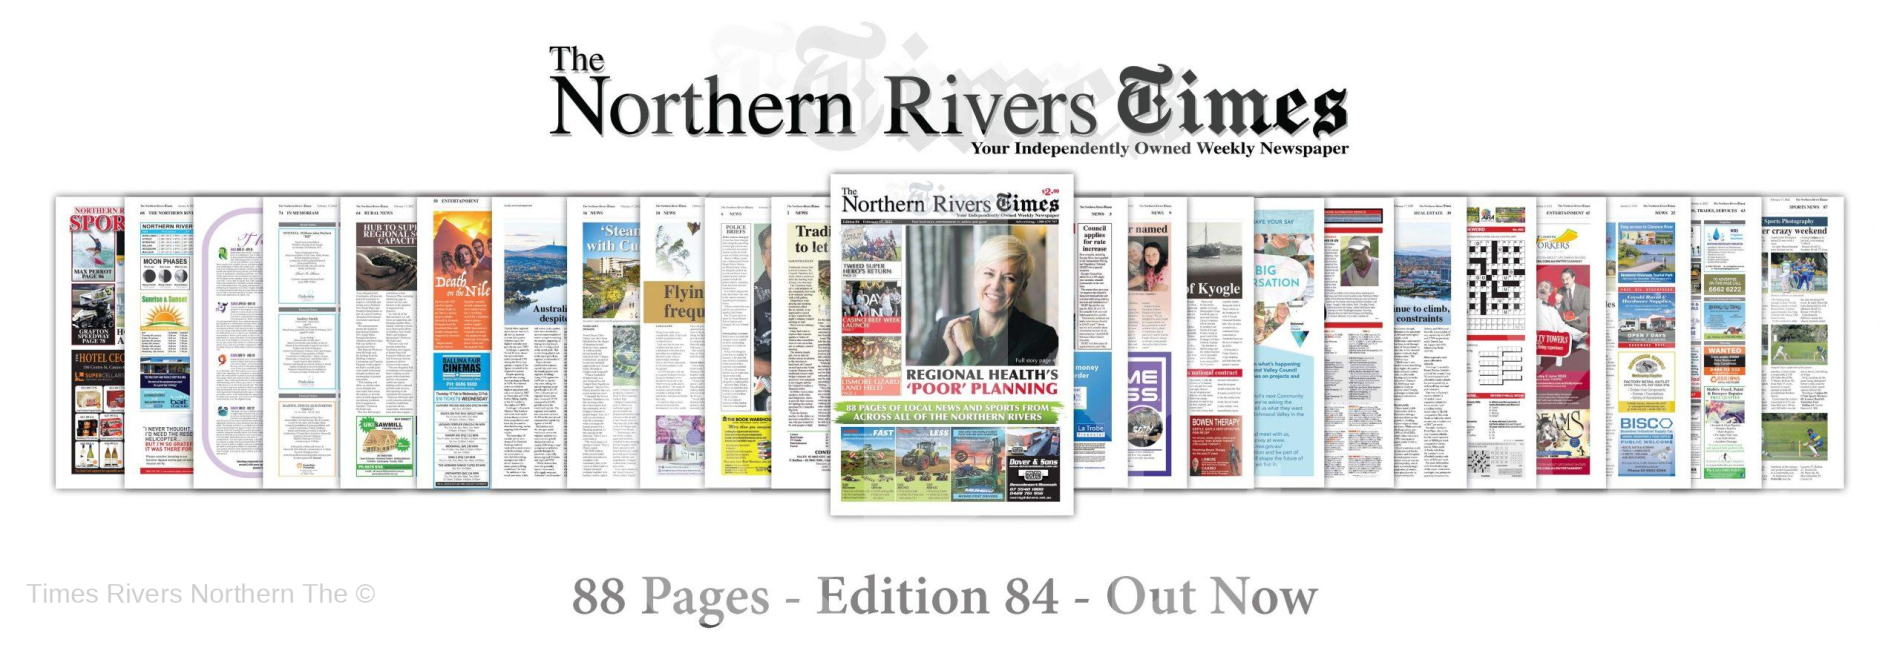 The Northern Rivers Times Newspaper